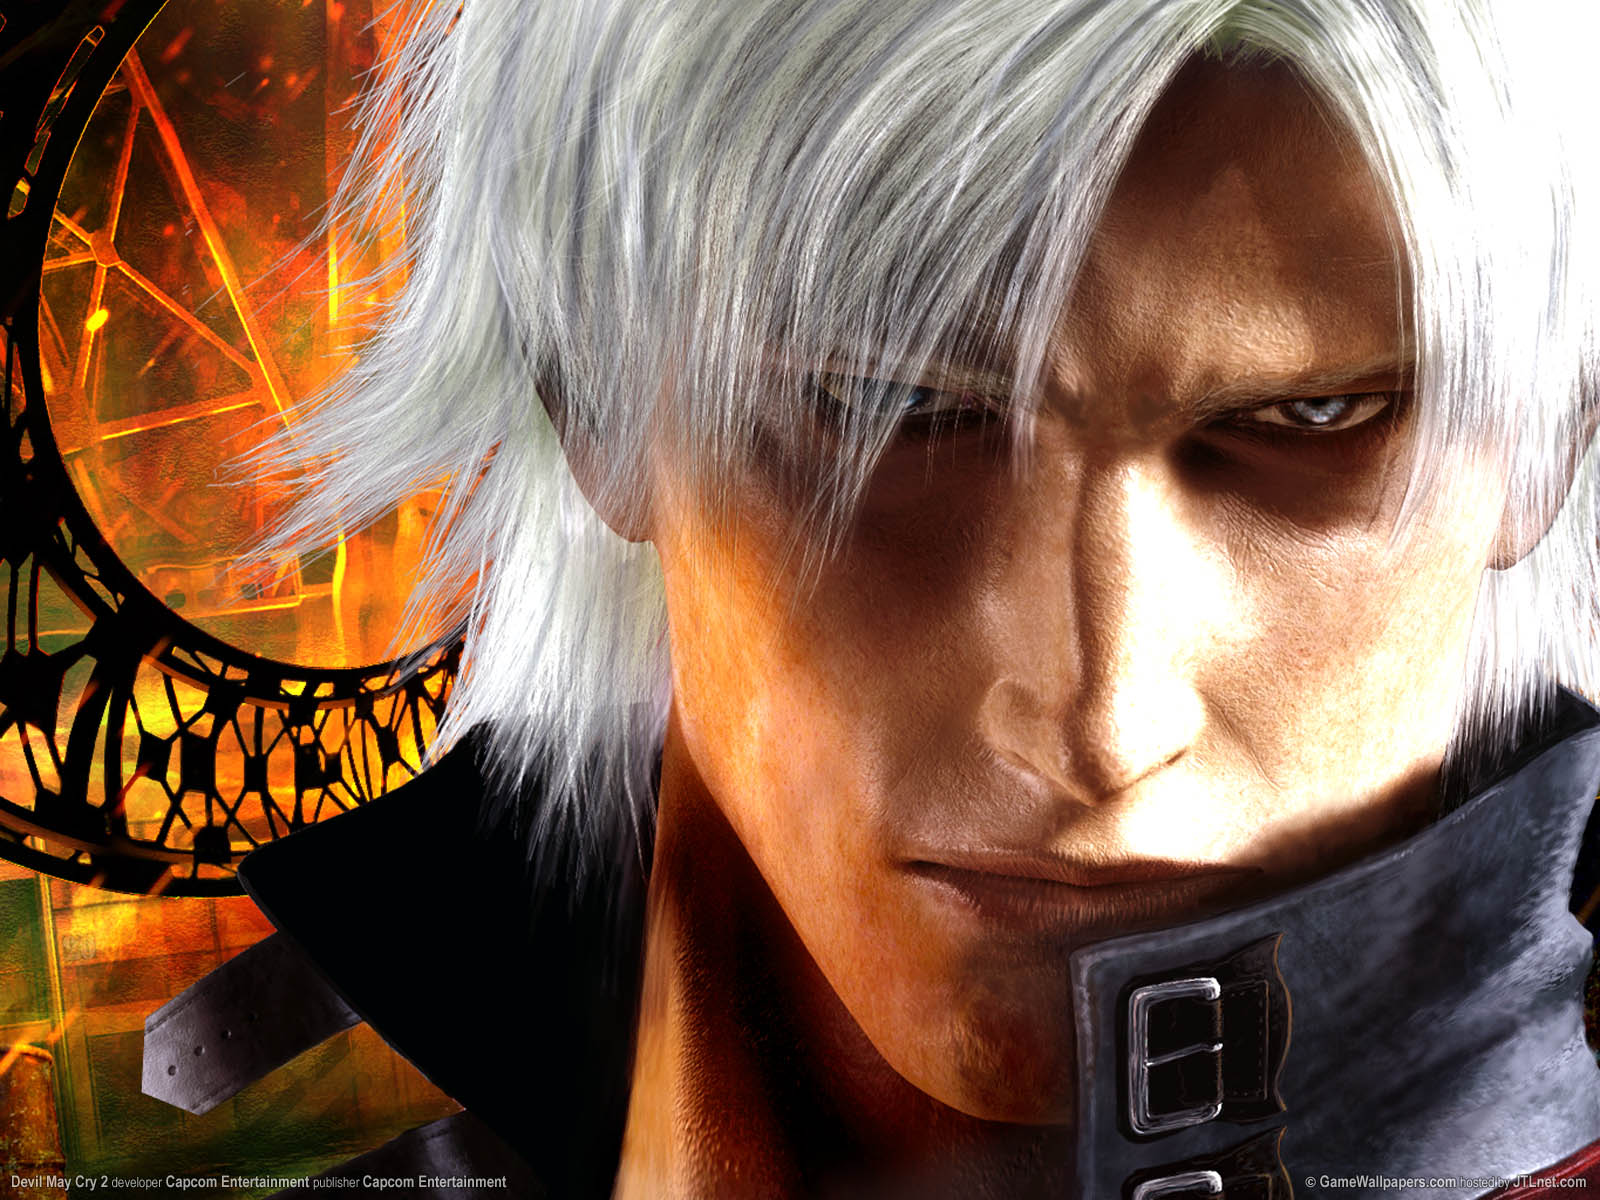 Devil May Cry 2 achtergrond 02 1600x1200